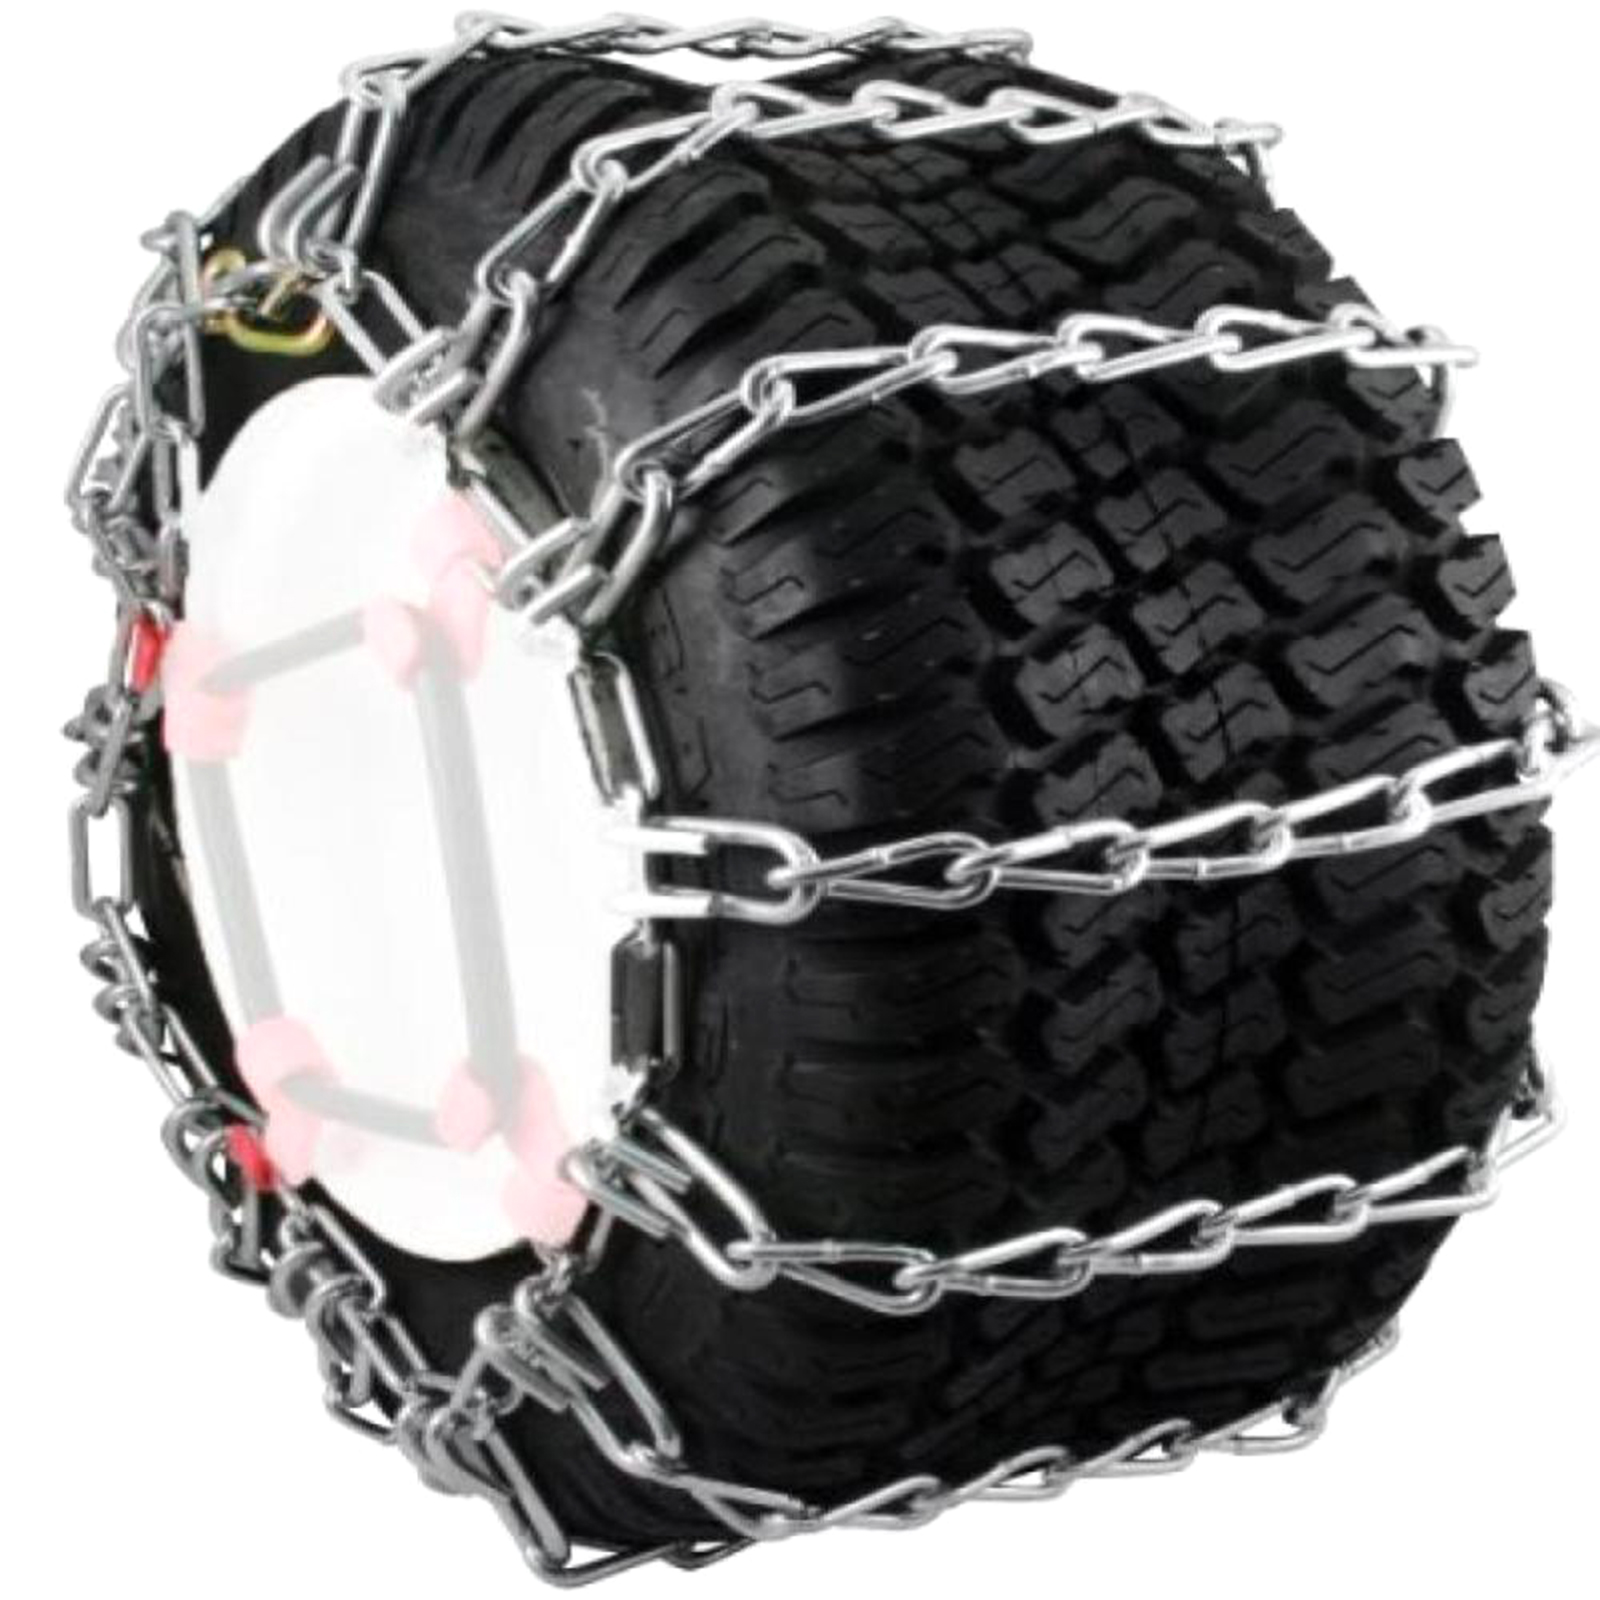 Peerless Security Chain 1062956 Max Trac Snow Blower Garden Tractor Tire Chains